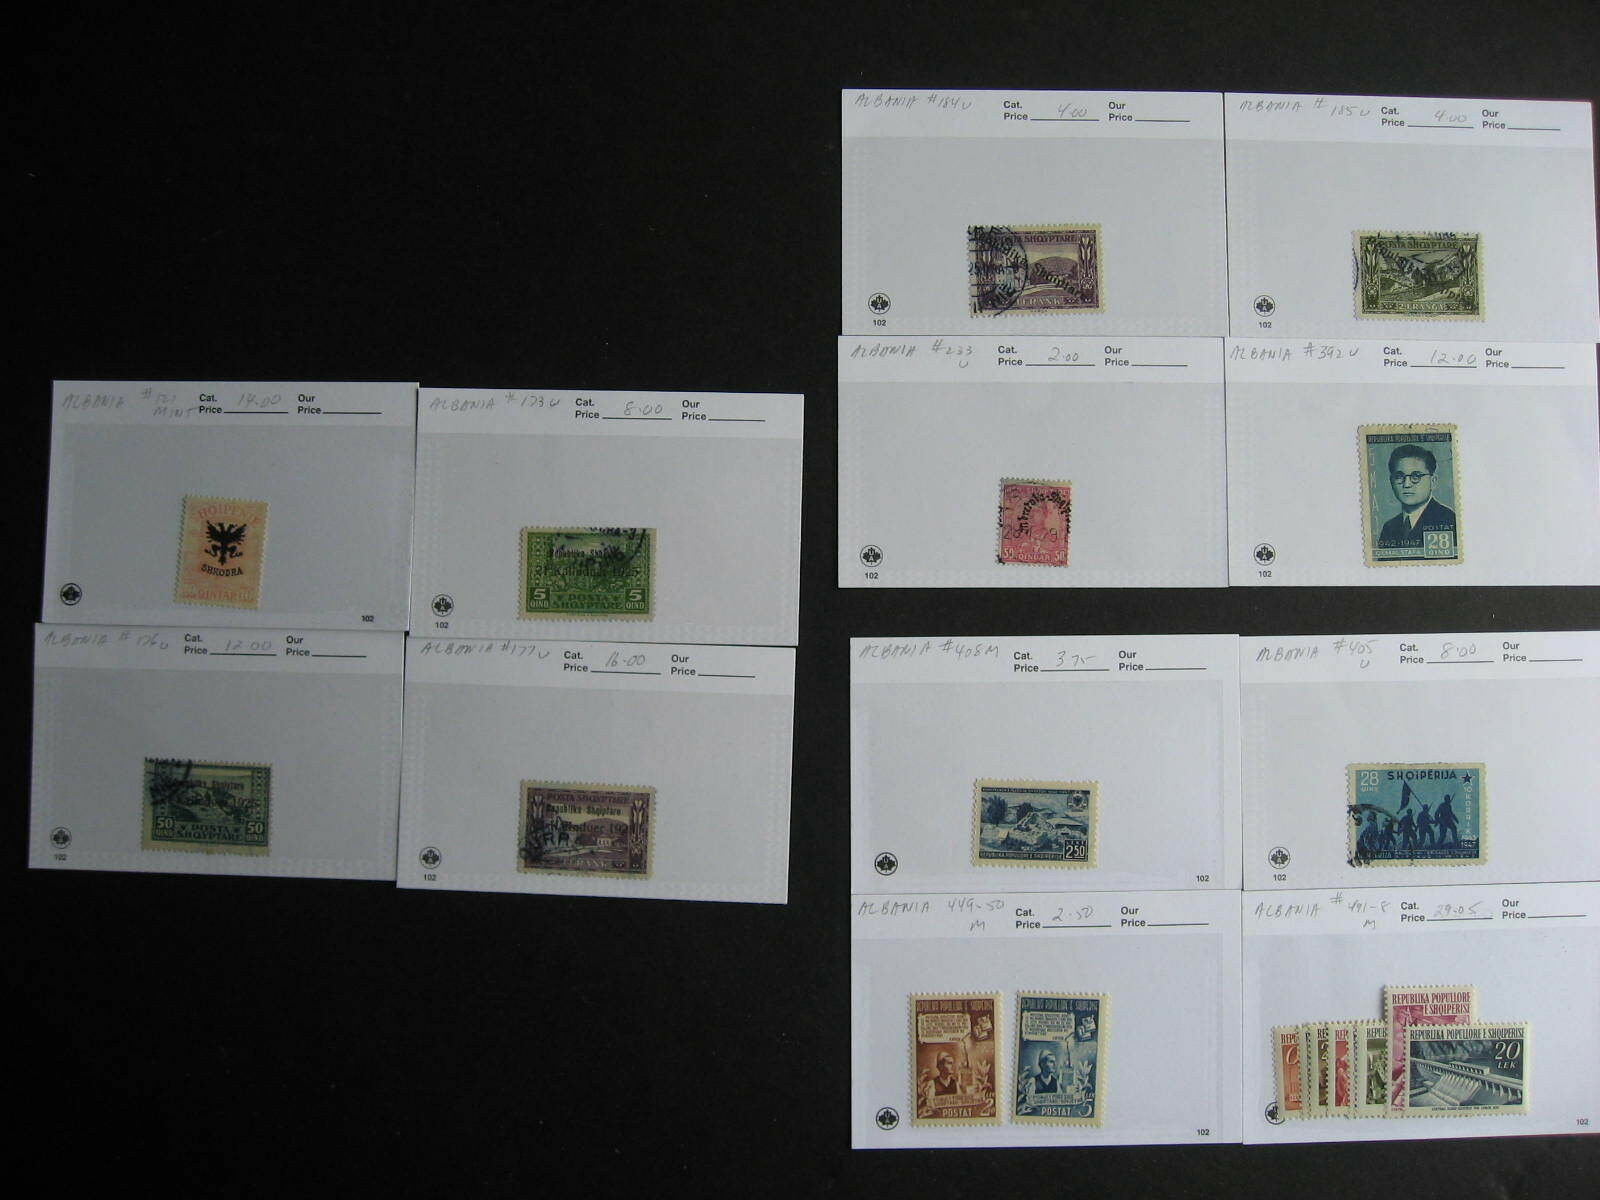 Hoard Breakup Sales Cards Albania Part 1of 8 Possible Misidentified & Mixed Cond